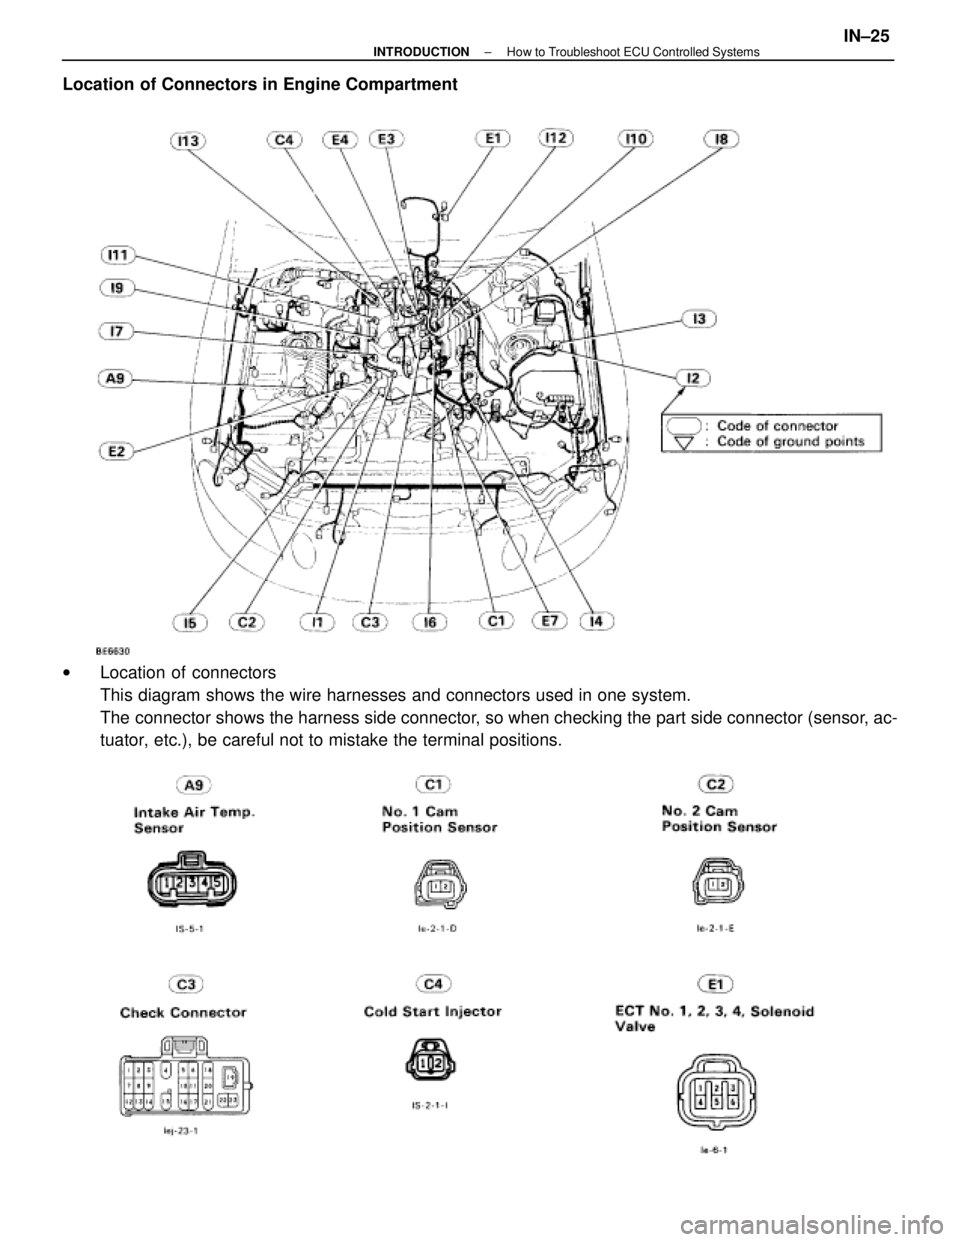 LEXUS SC300 1991  Service Owners Manual 
Location of Connectors in Engine Compartment
wLocation of connectors
This diagram shows the wire harnesses and connectors used in one system.\
The connector shows the harness side connector, so when